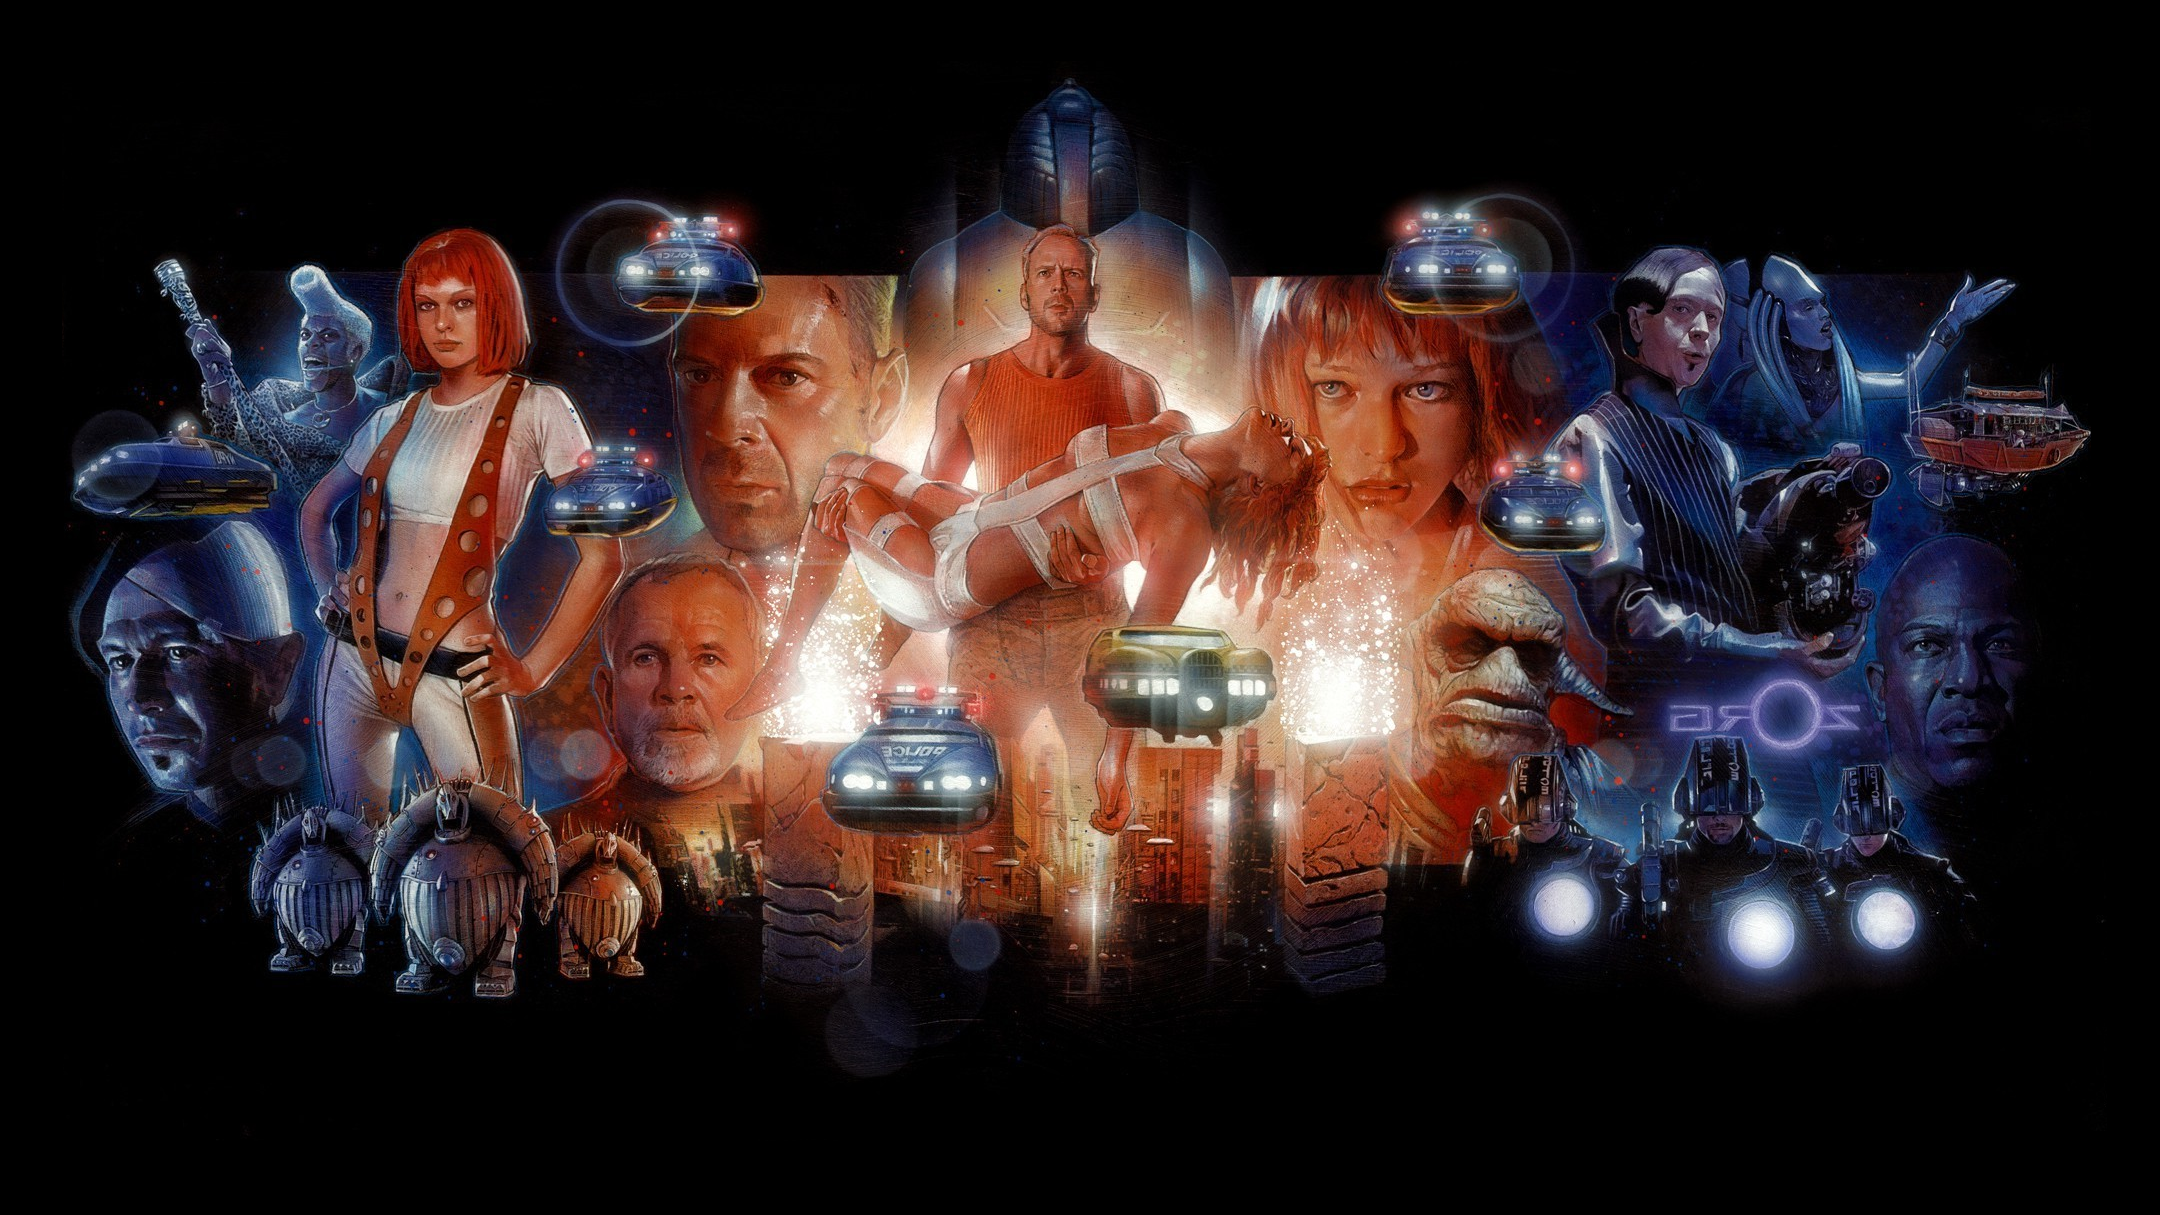 General 2160x1215 The Fifth Element movies Milla Jovovich  science fiction Luc Besson Bruce Willis Gary Oldman Leeloo